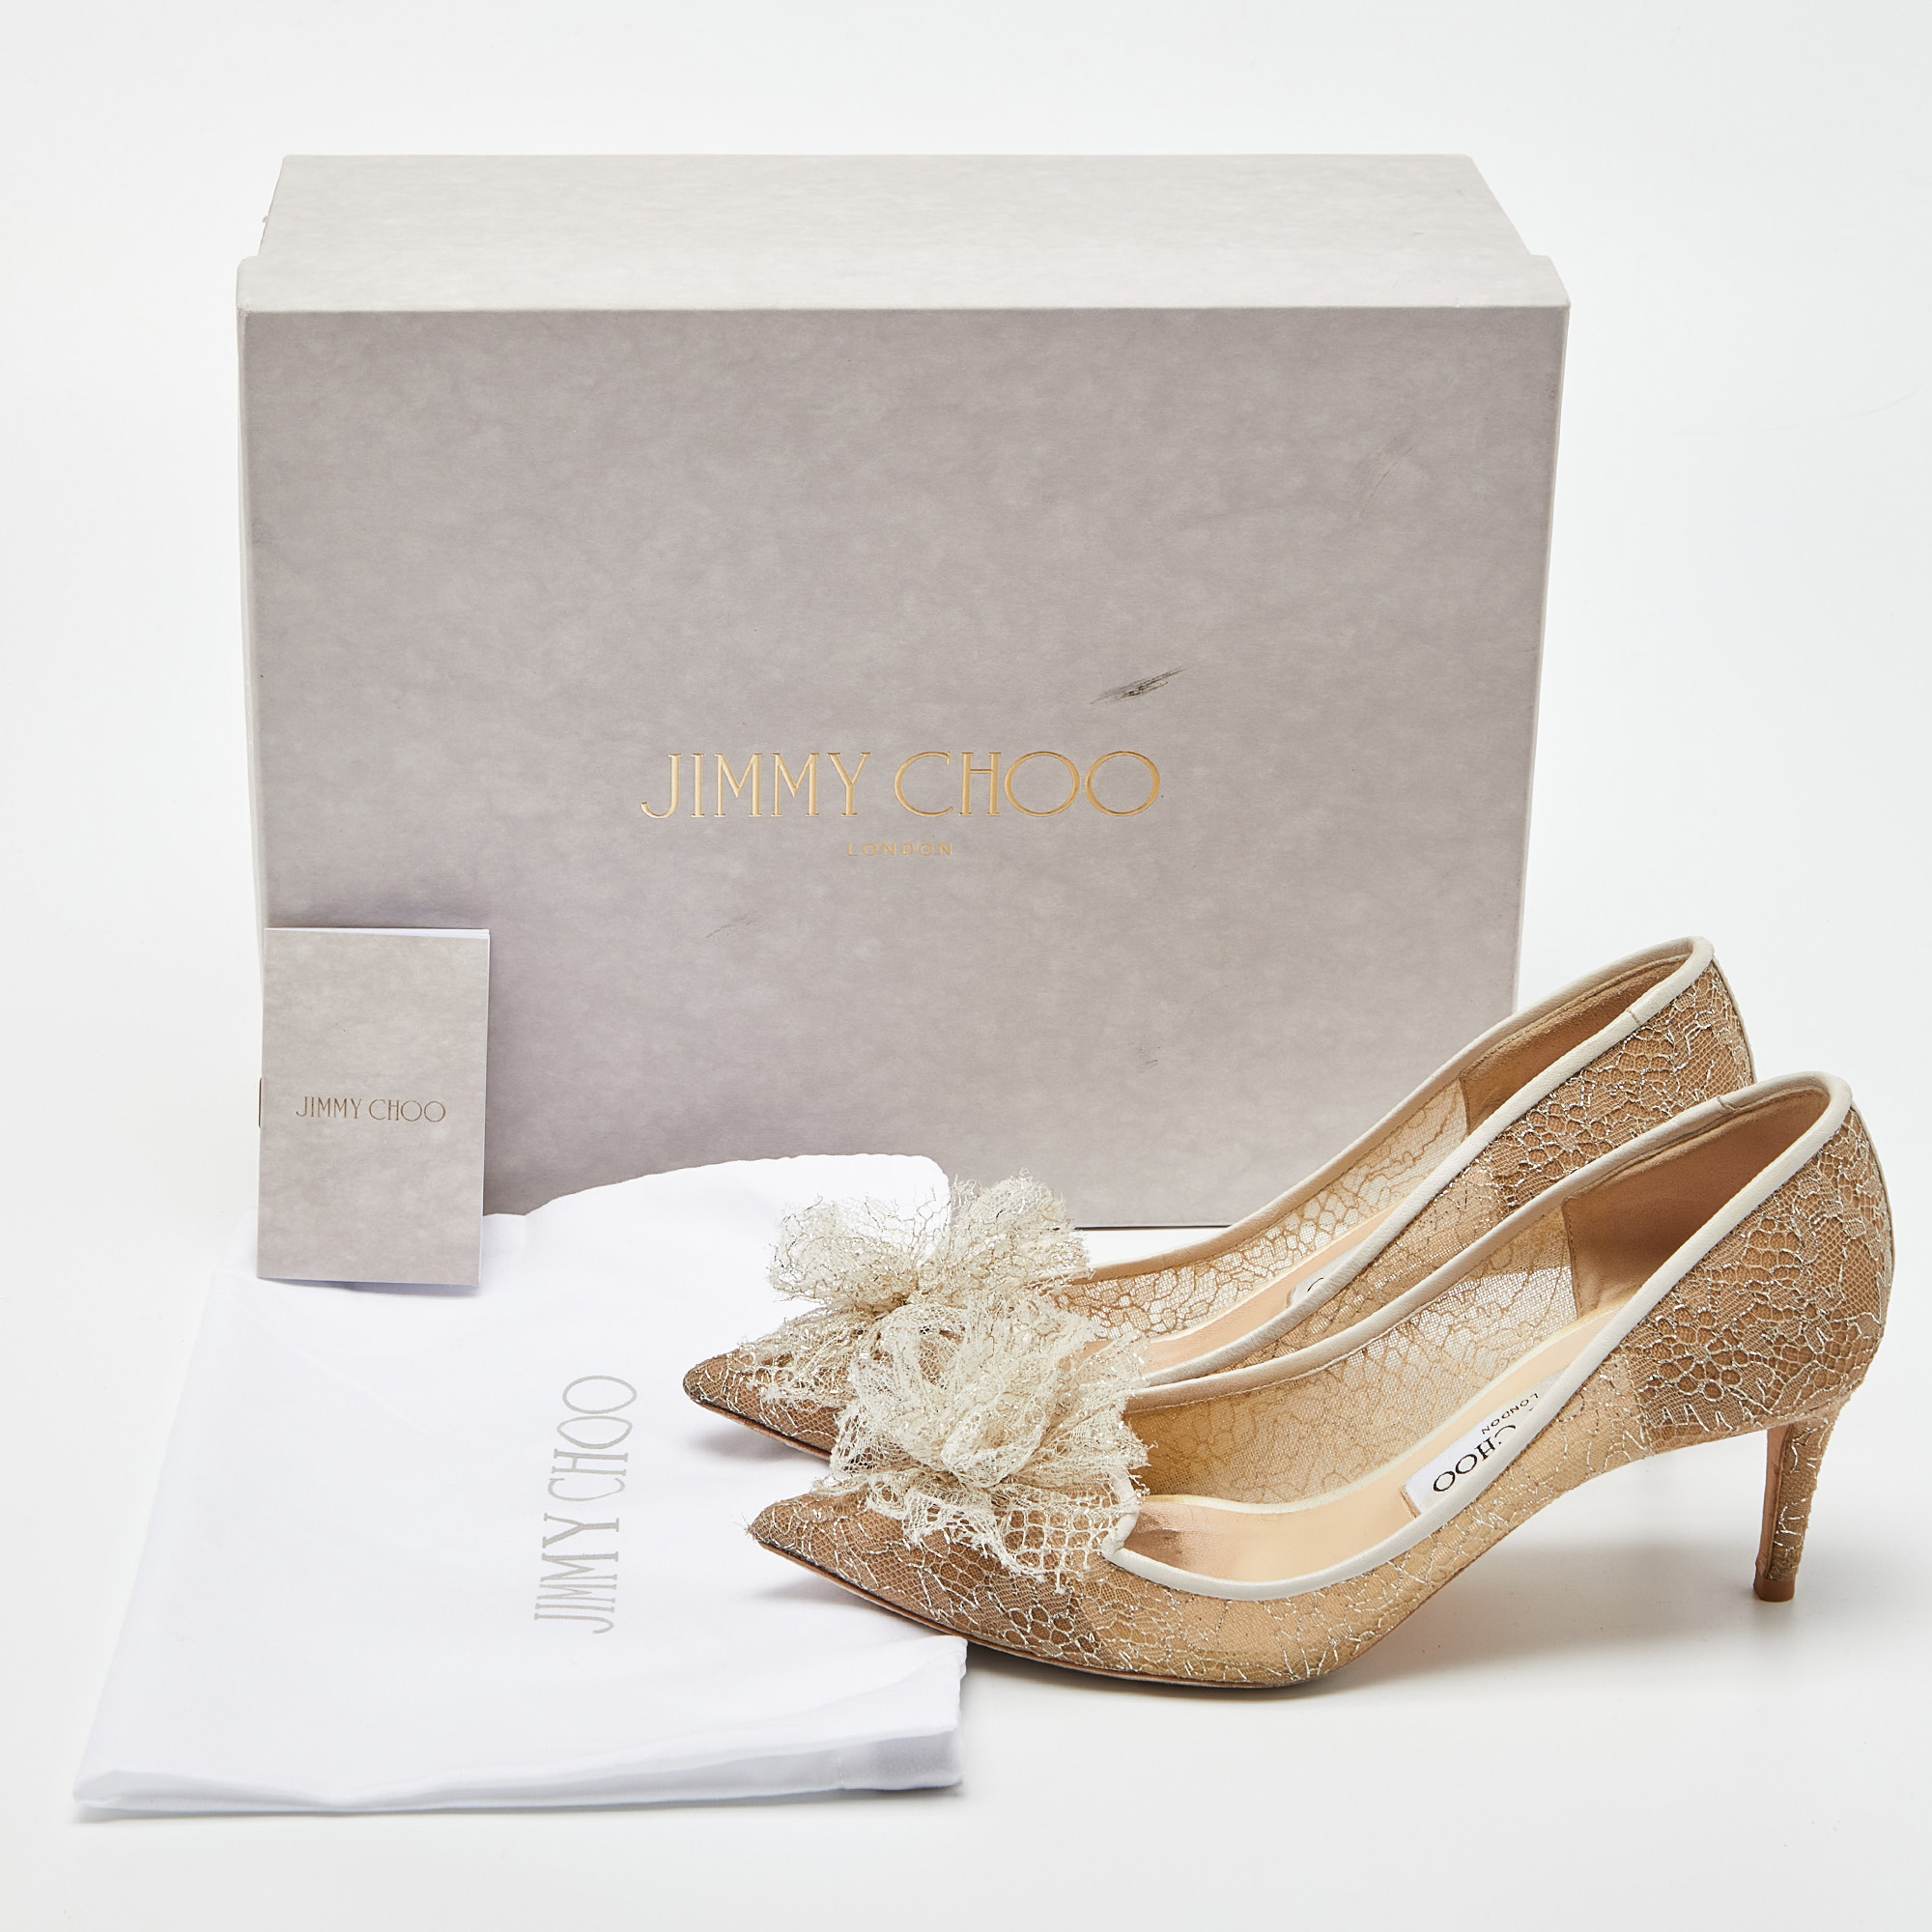 Jimmy Choo Beige Lace And Leather Pointed Toe Pumps Size 36.5